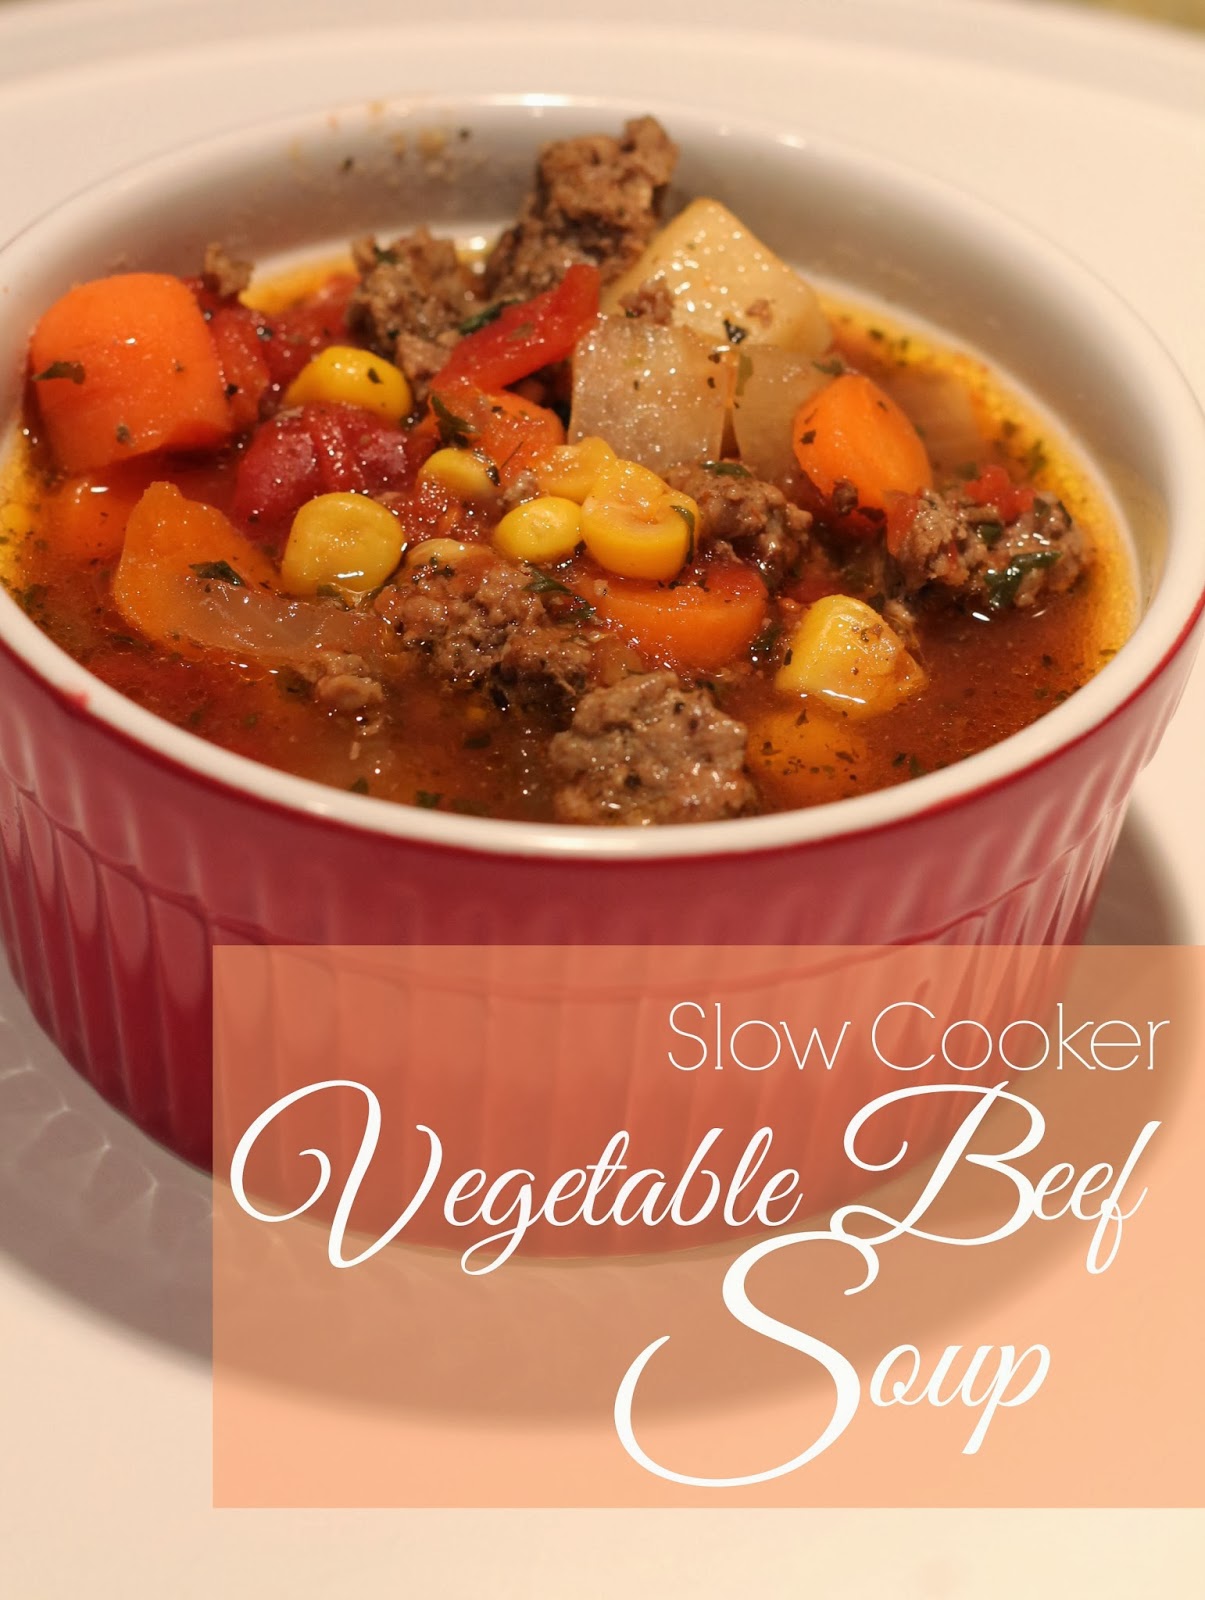 Barnabas Lane: Tasty Tuesday- Slow Cooker Vegetable Beef Soup